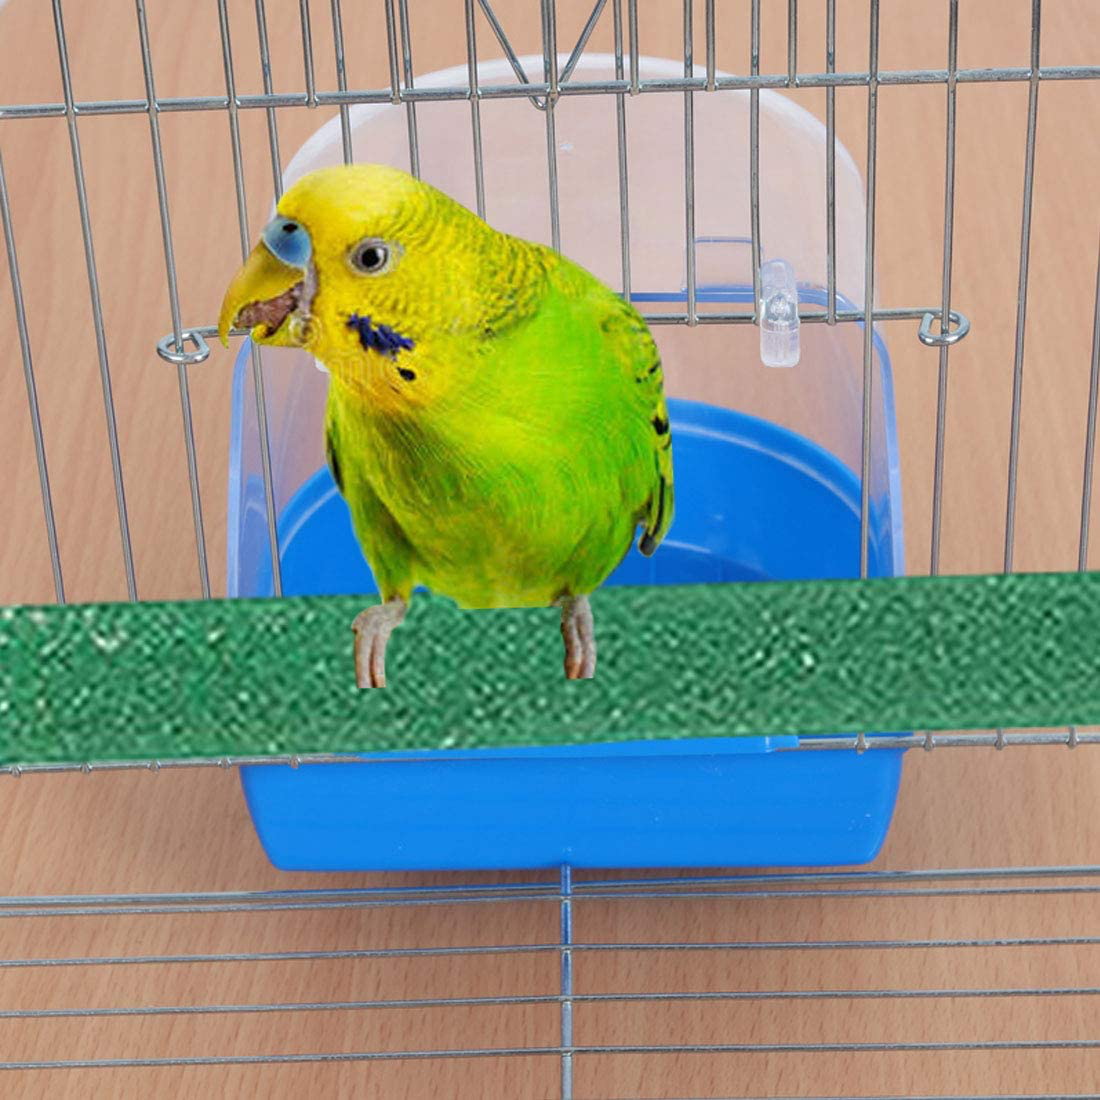 PINVNBY Parrot Bath Box Bird Bathtub Parakeet Bathing Tube with Bird Perches Stand Paw Grinding Cage Accessories Ideal for Small Brids Lovebirds Finches Canary(5 PCS Random Color) Animals & Pet Supplies > Pet Supplies > Bird Supplies > Bird Cage Accessories PINVNBY   